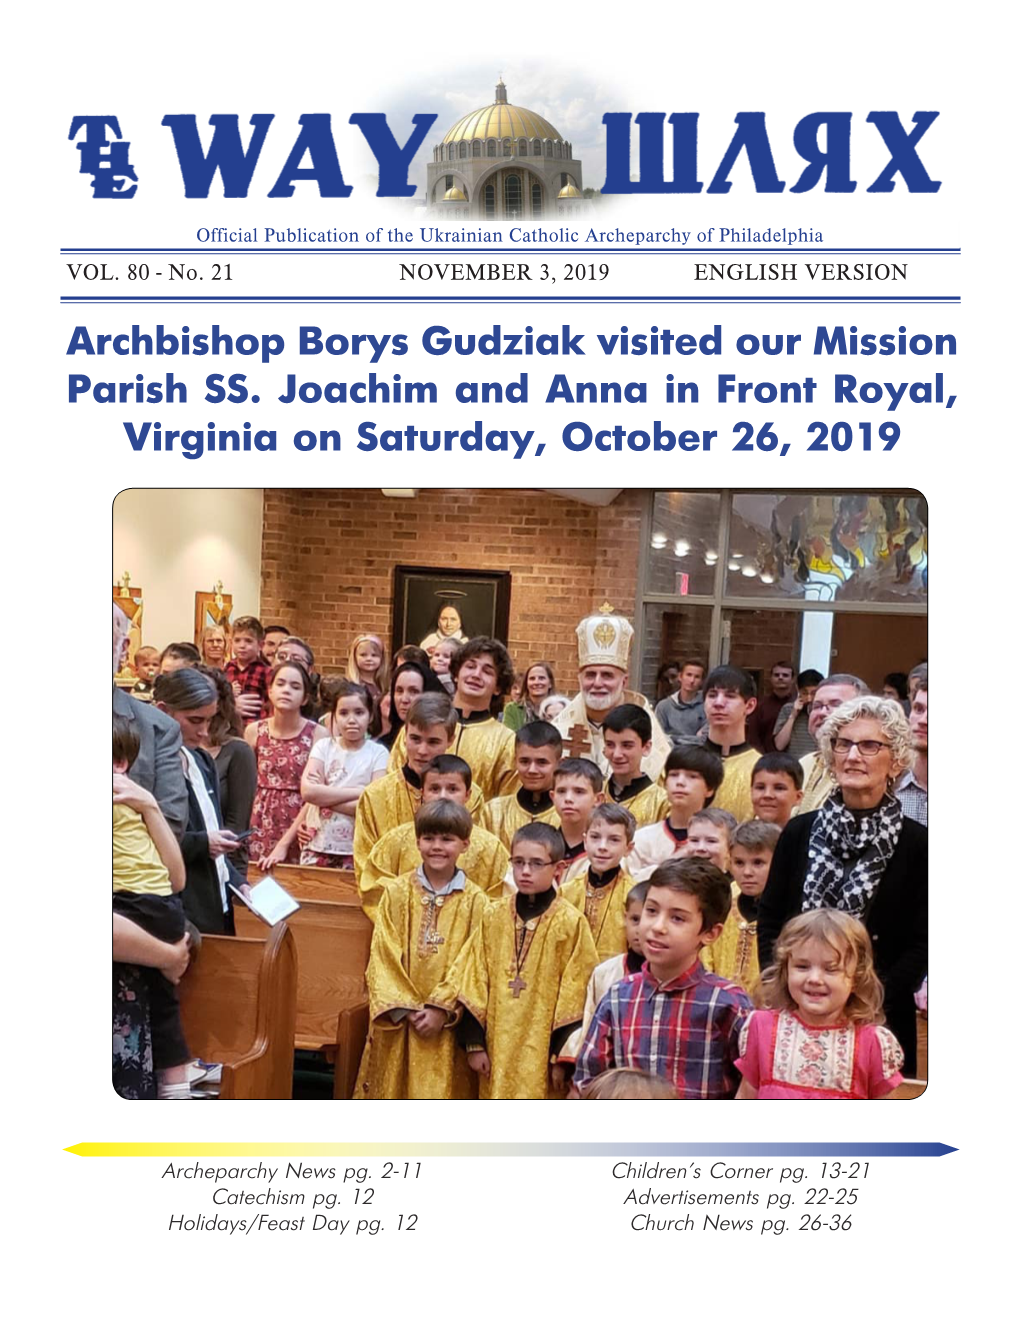 Archbishop Borys Gudziak Visited Our Mission Parish SS. Joachim and Anna in Front Royal, Virginia on Saturday, October 26, 2019